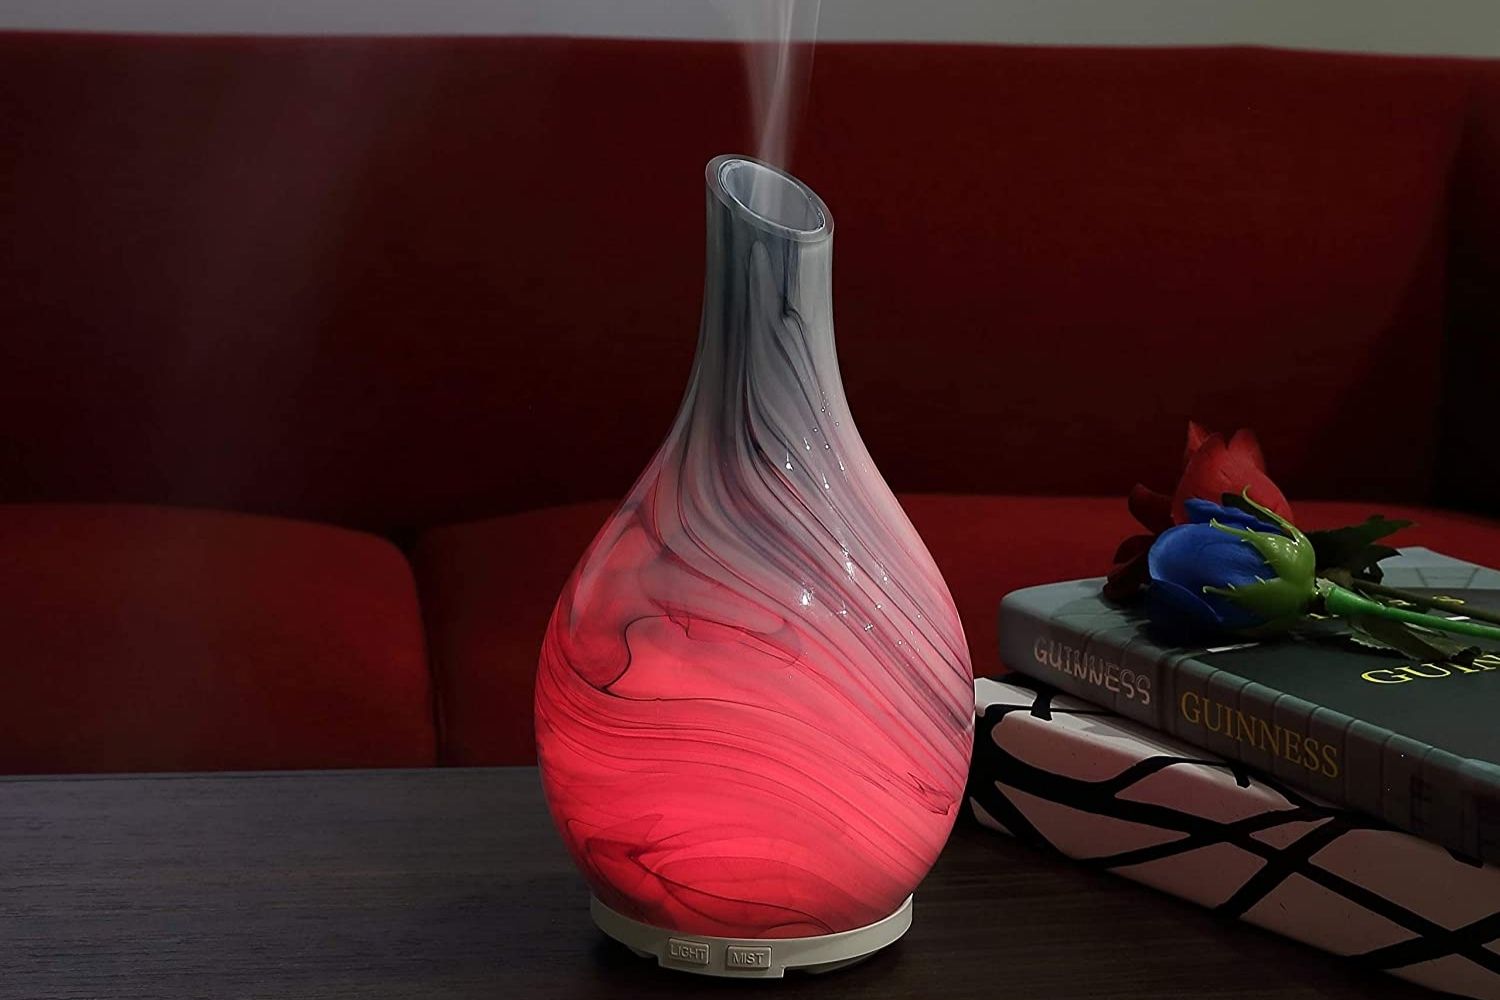 One of the best room humidifiers glowing red and releasing a humidifying mist while on a table.